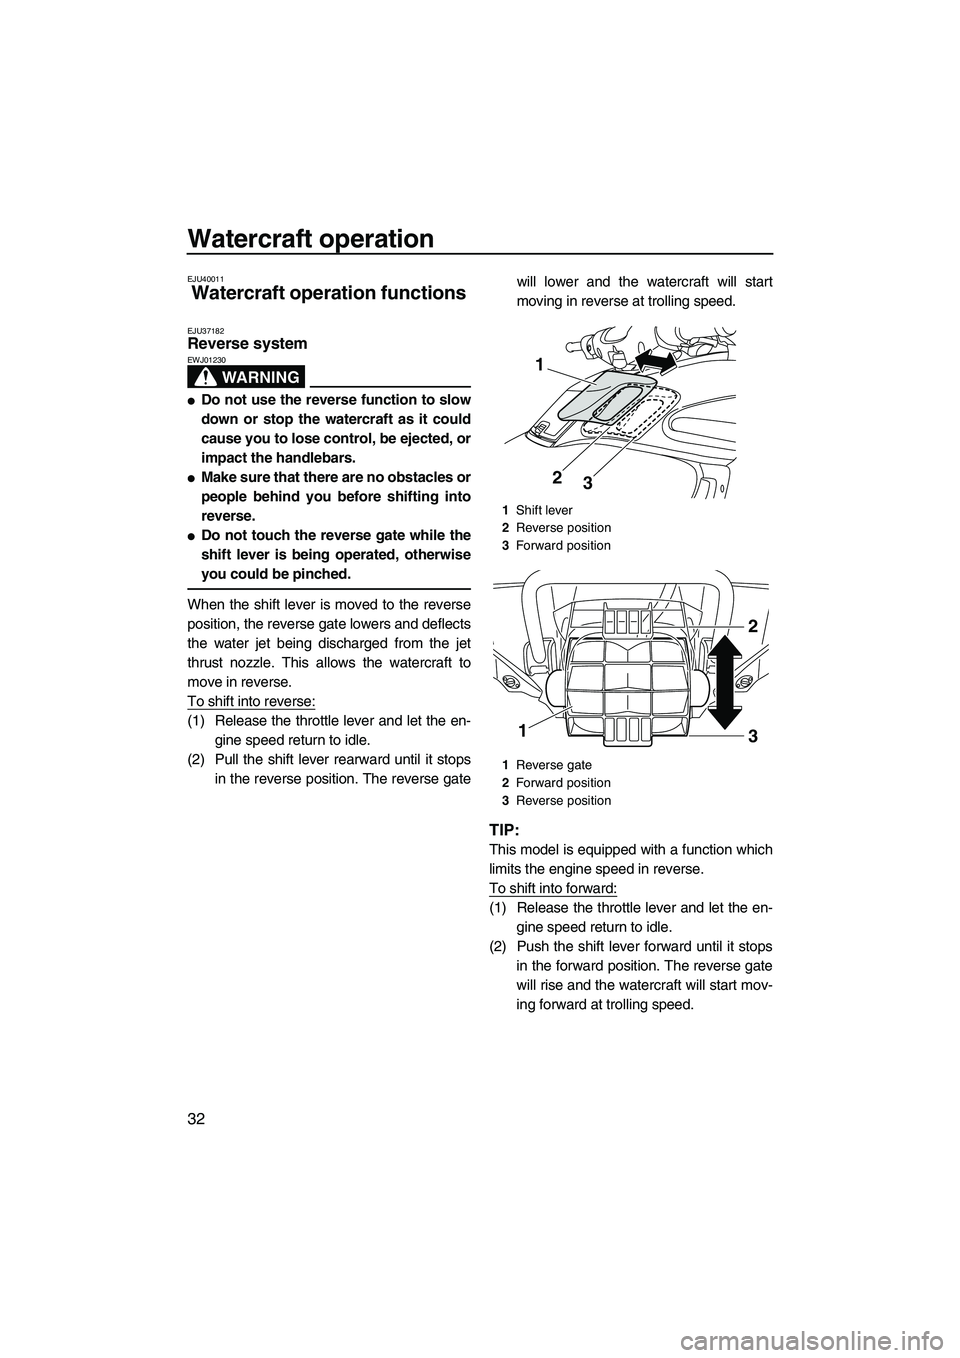 YAMAHA FZS 2013 Owners Guide Watercraft operation
32
EJU40011
Watercraft operation functions 
EJU37182Reverse system 
WARNING
EWJ01230
●Do not use the reverse function to slow
down or stop the watercraft as it could
cause you t